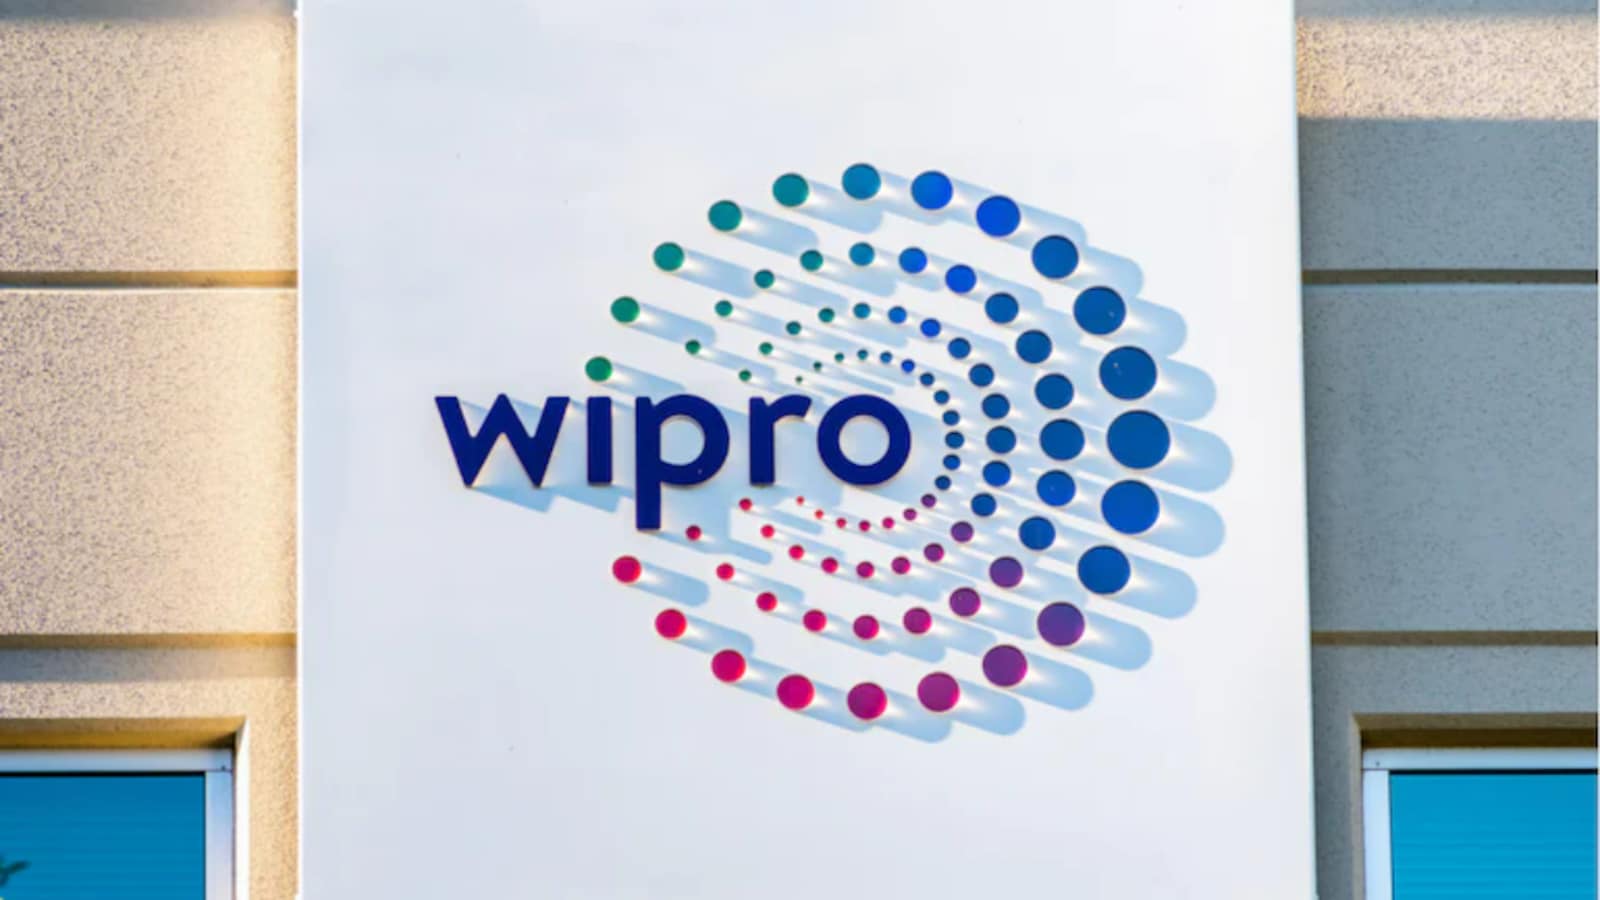 Wipro offers freshers lower pay amid delays in onboarding